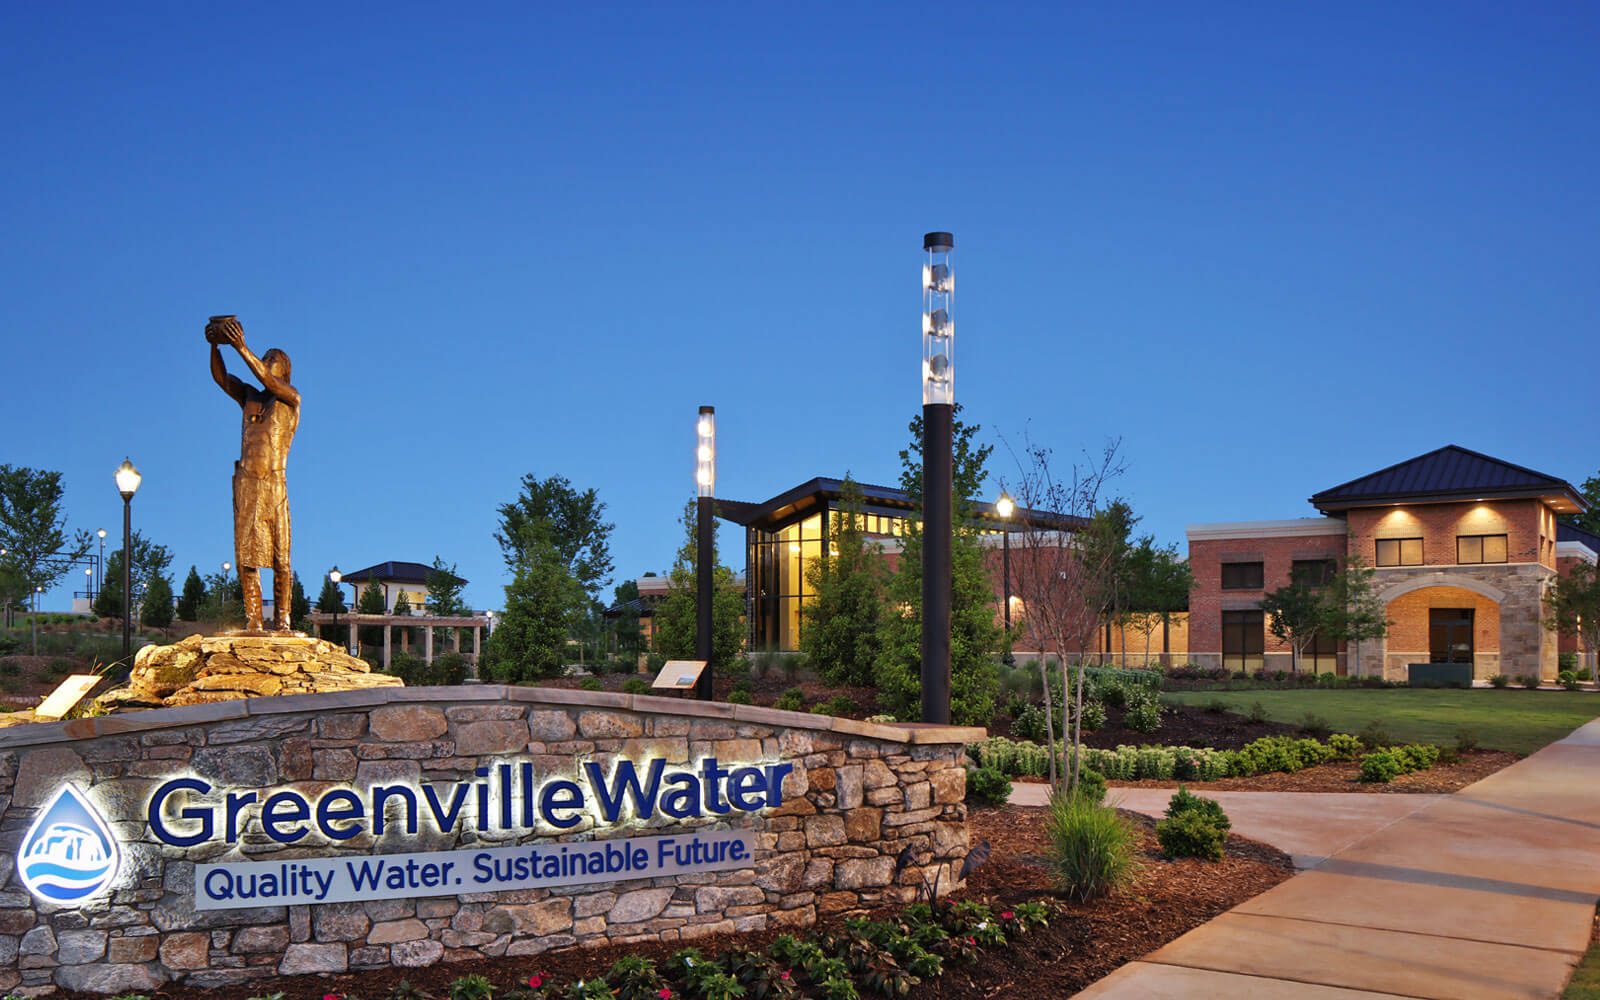 image job the Greenville water department